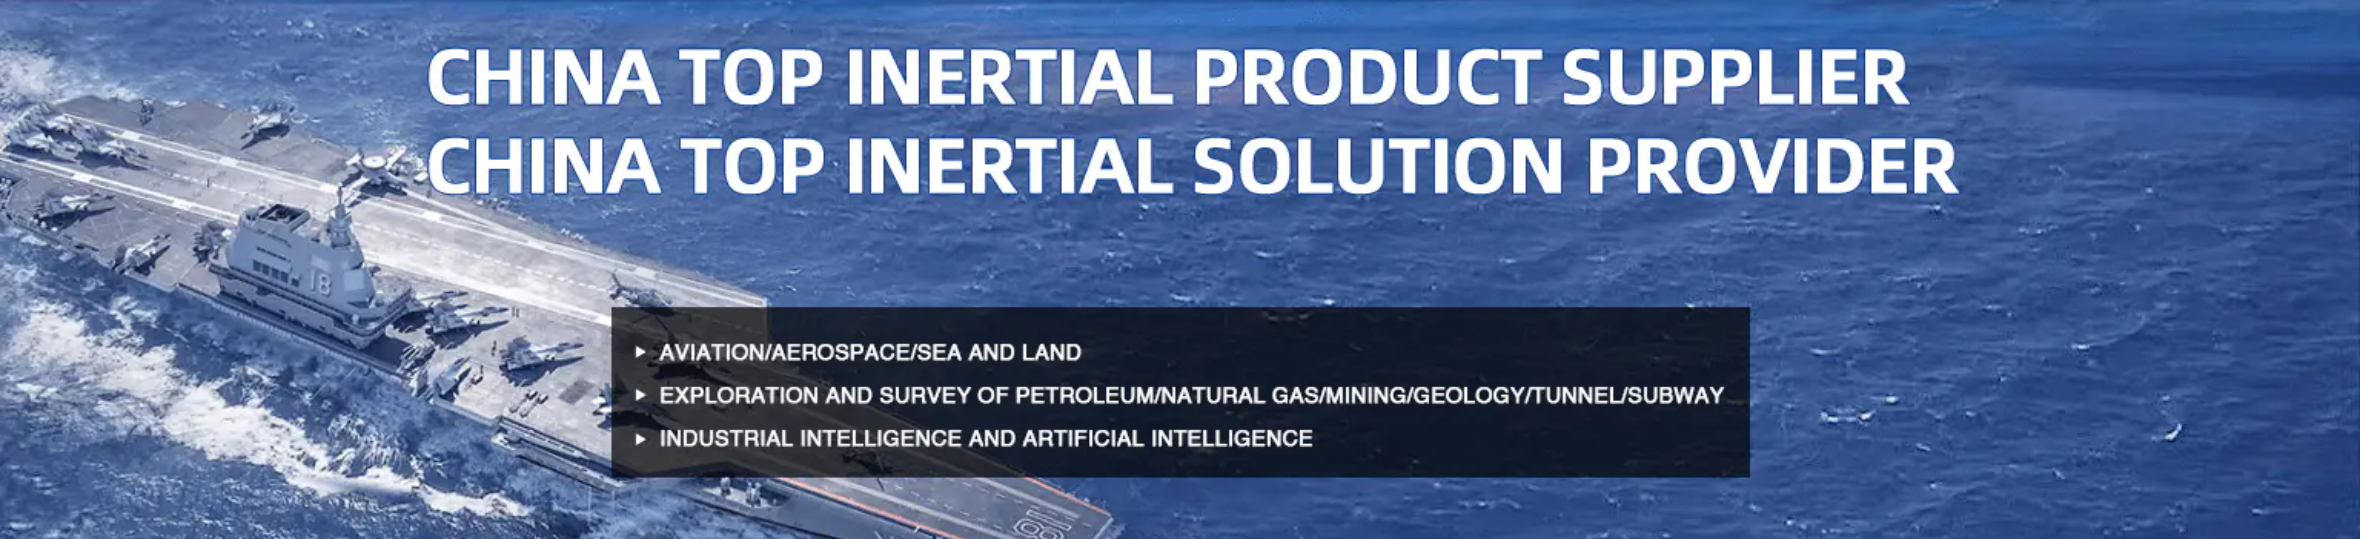 china-top-inertial-products-1.png